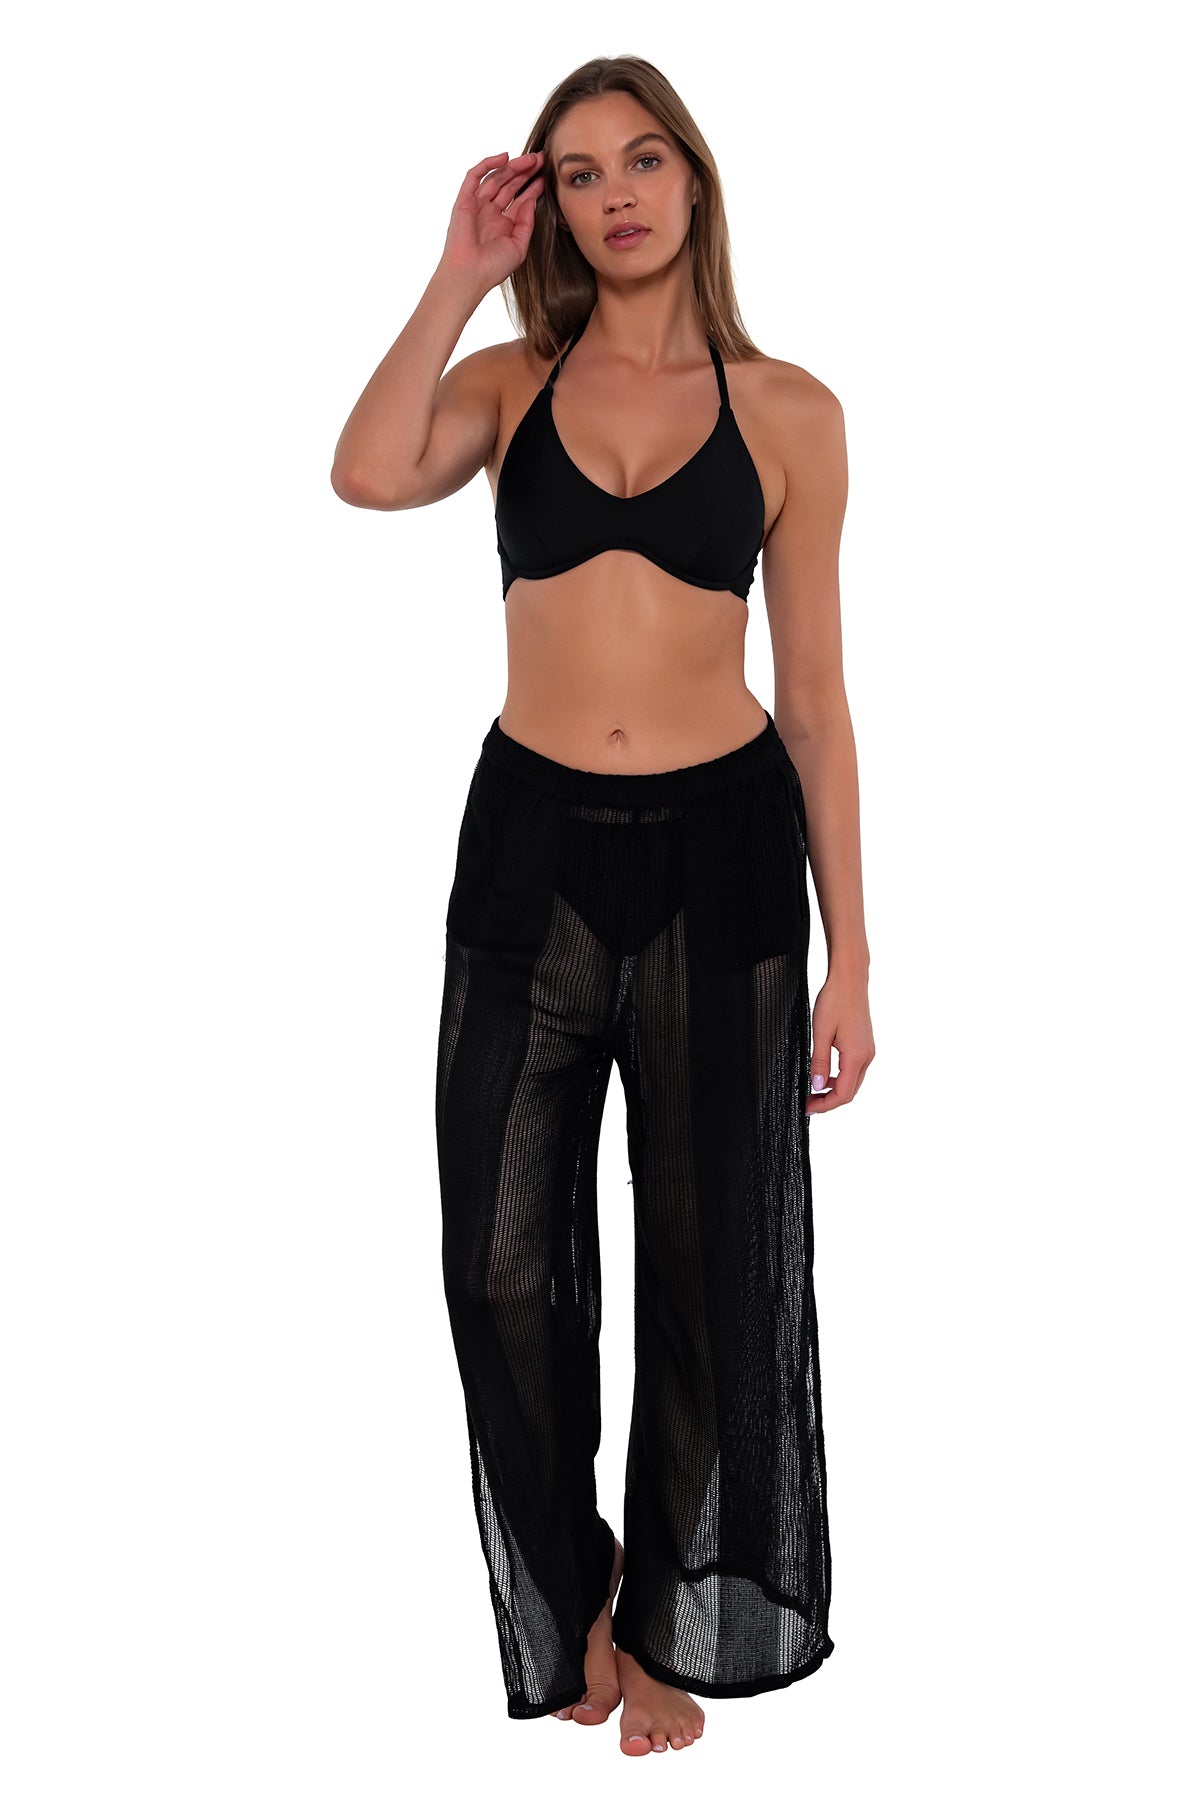 Front pose #3 of Daria wearing Sunsets Black Breezy Beach Pant with matching Brooke U-Wire bikini top